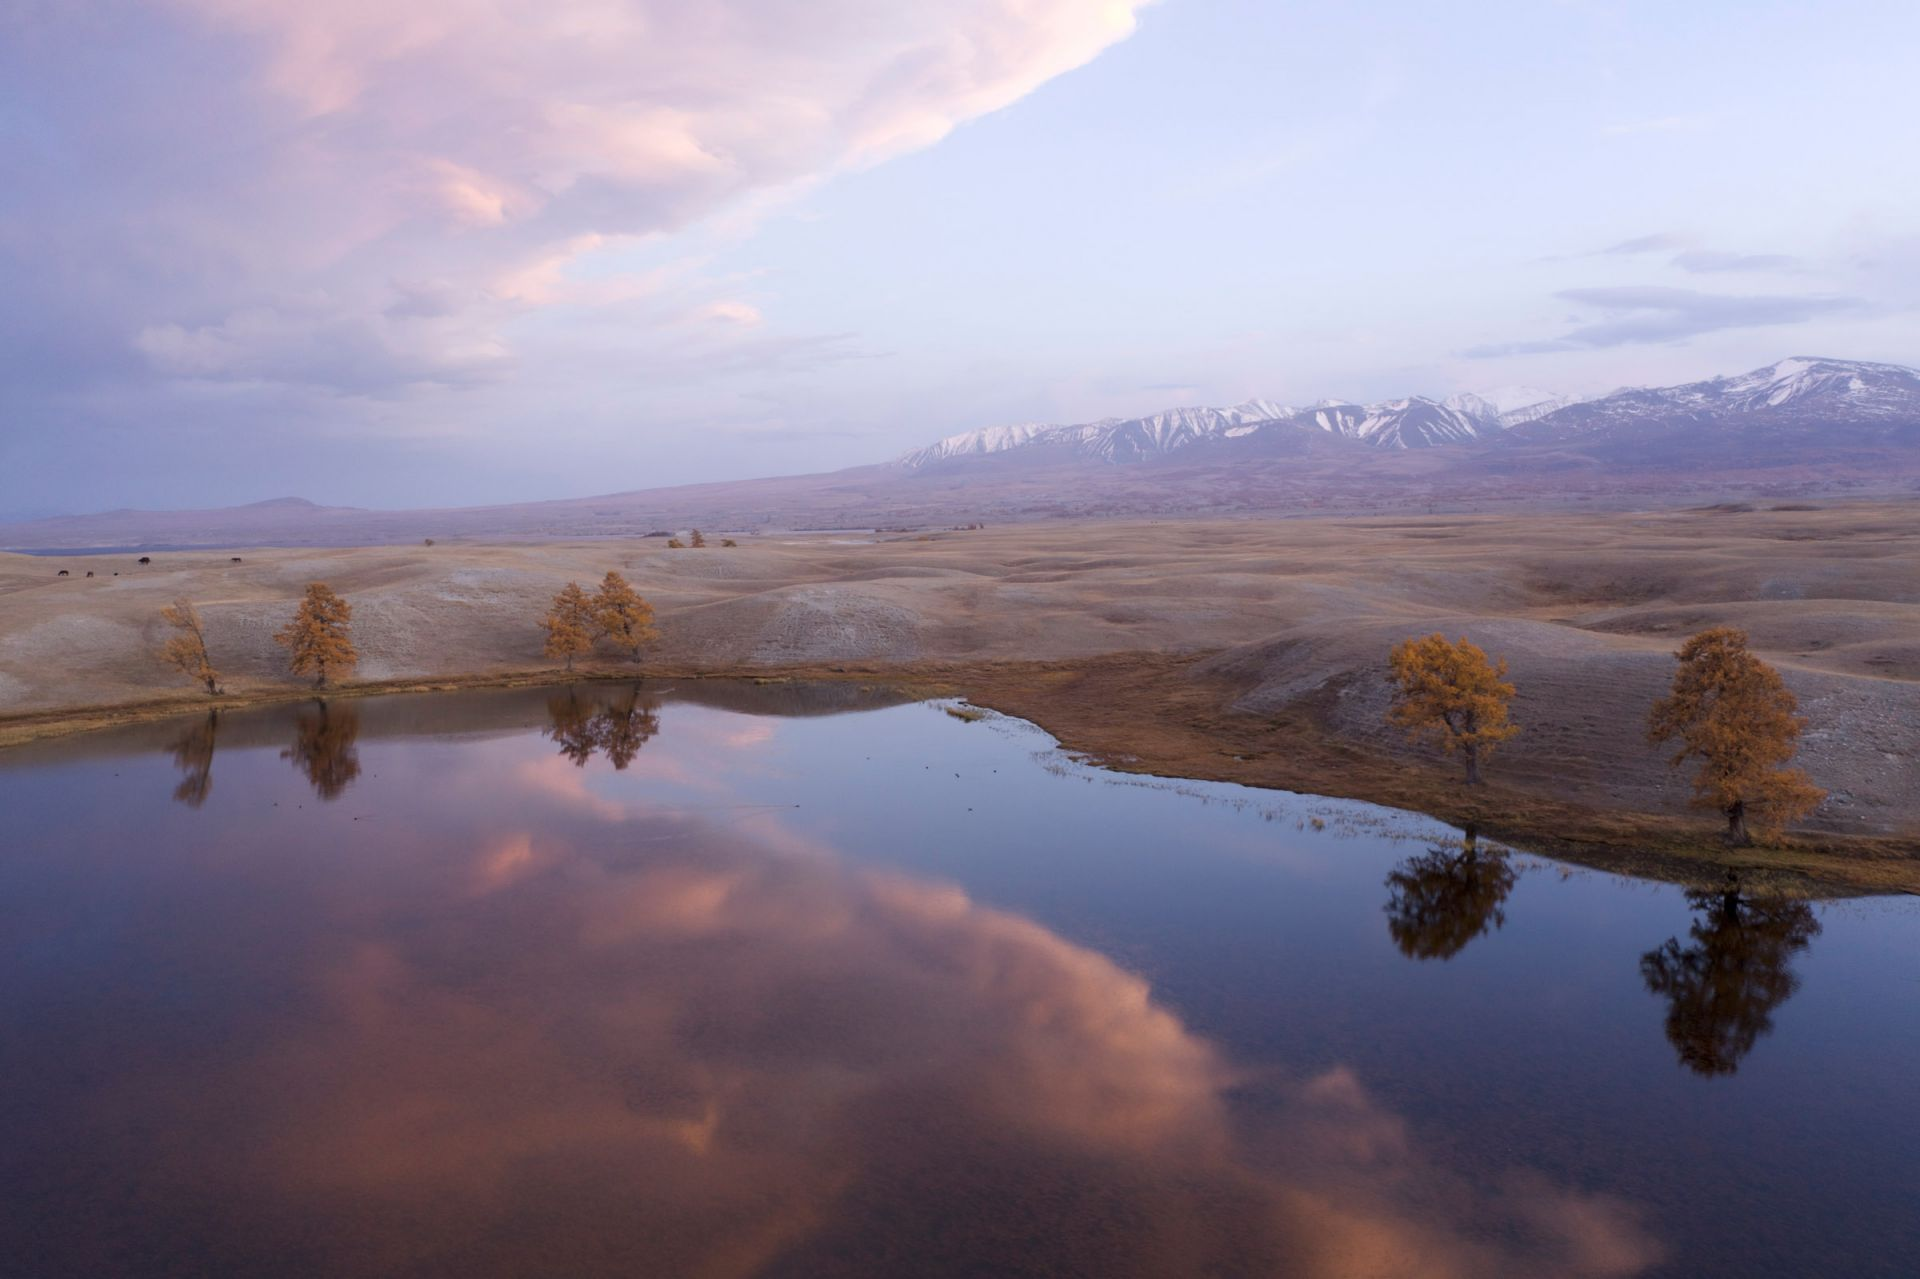 A view of Western Mongolia